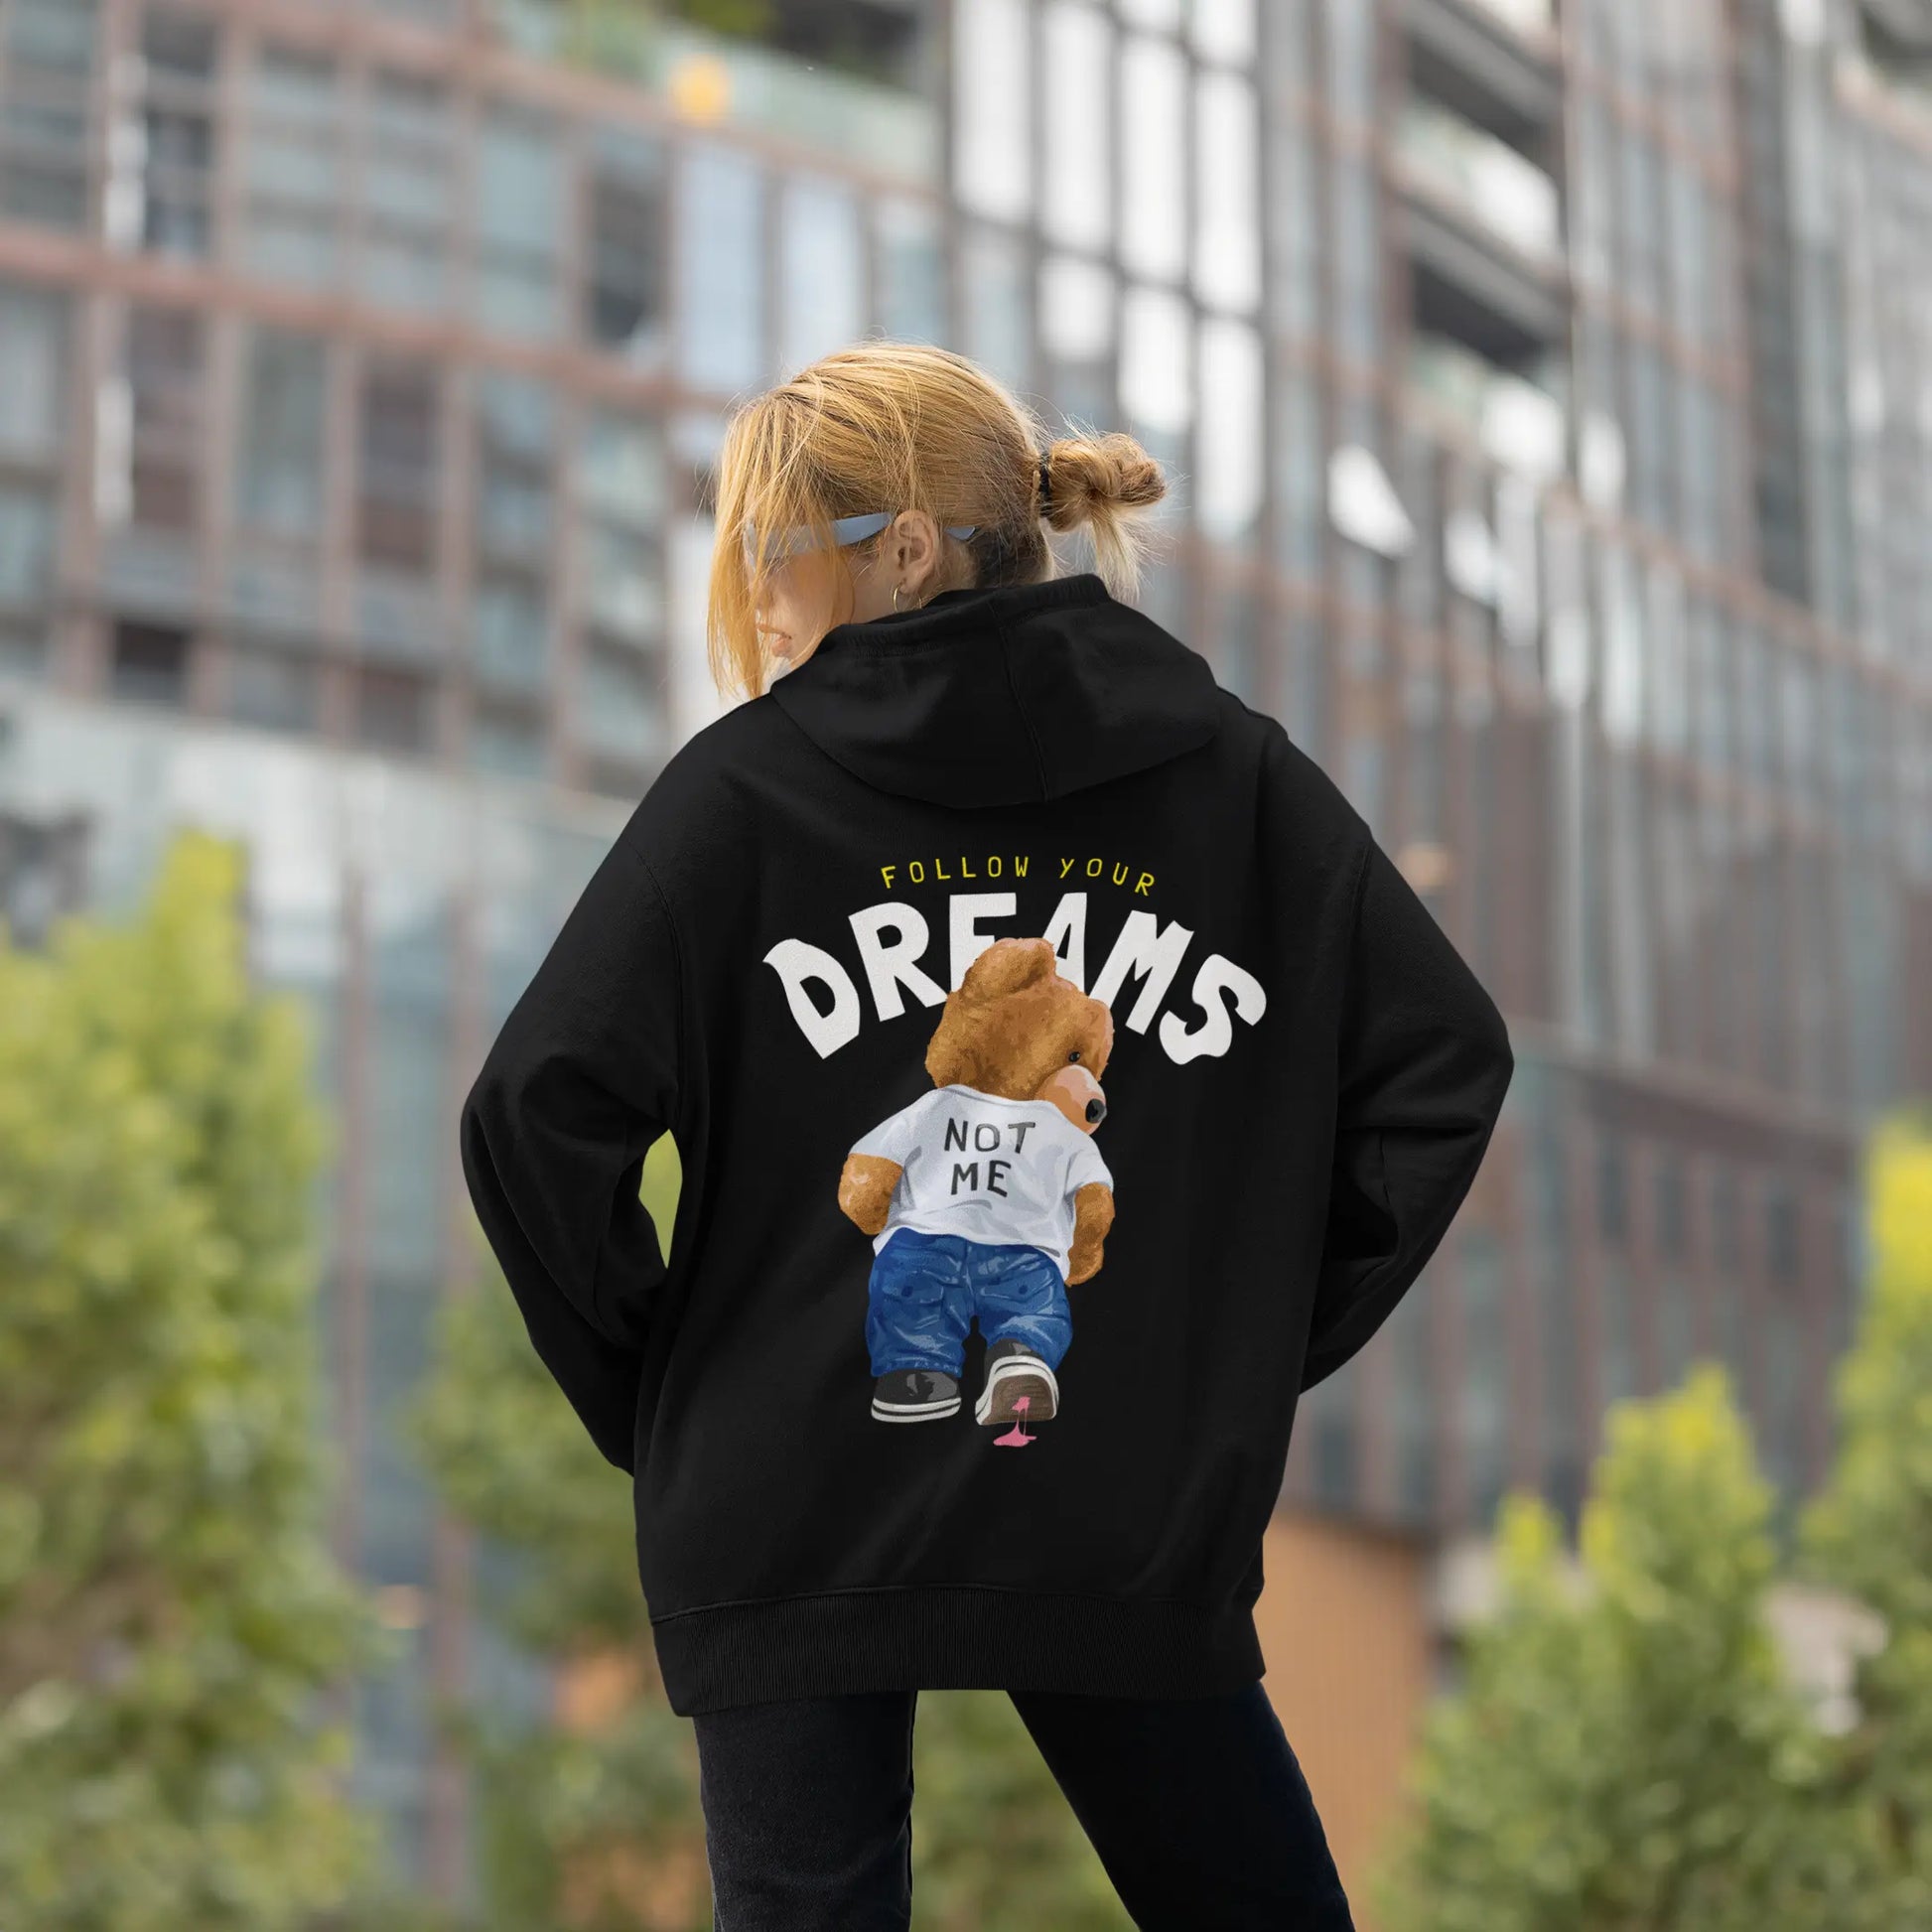 Women's Black Oversized Hoodie With Teddy Bear Graphic Print –